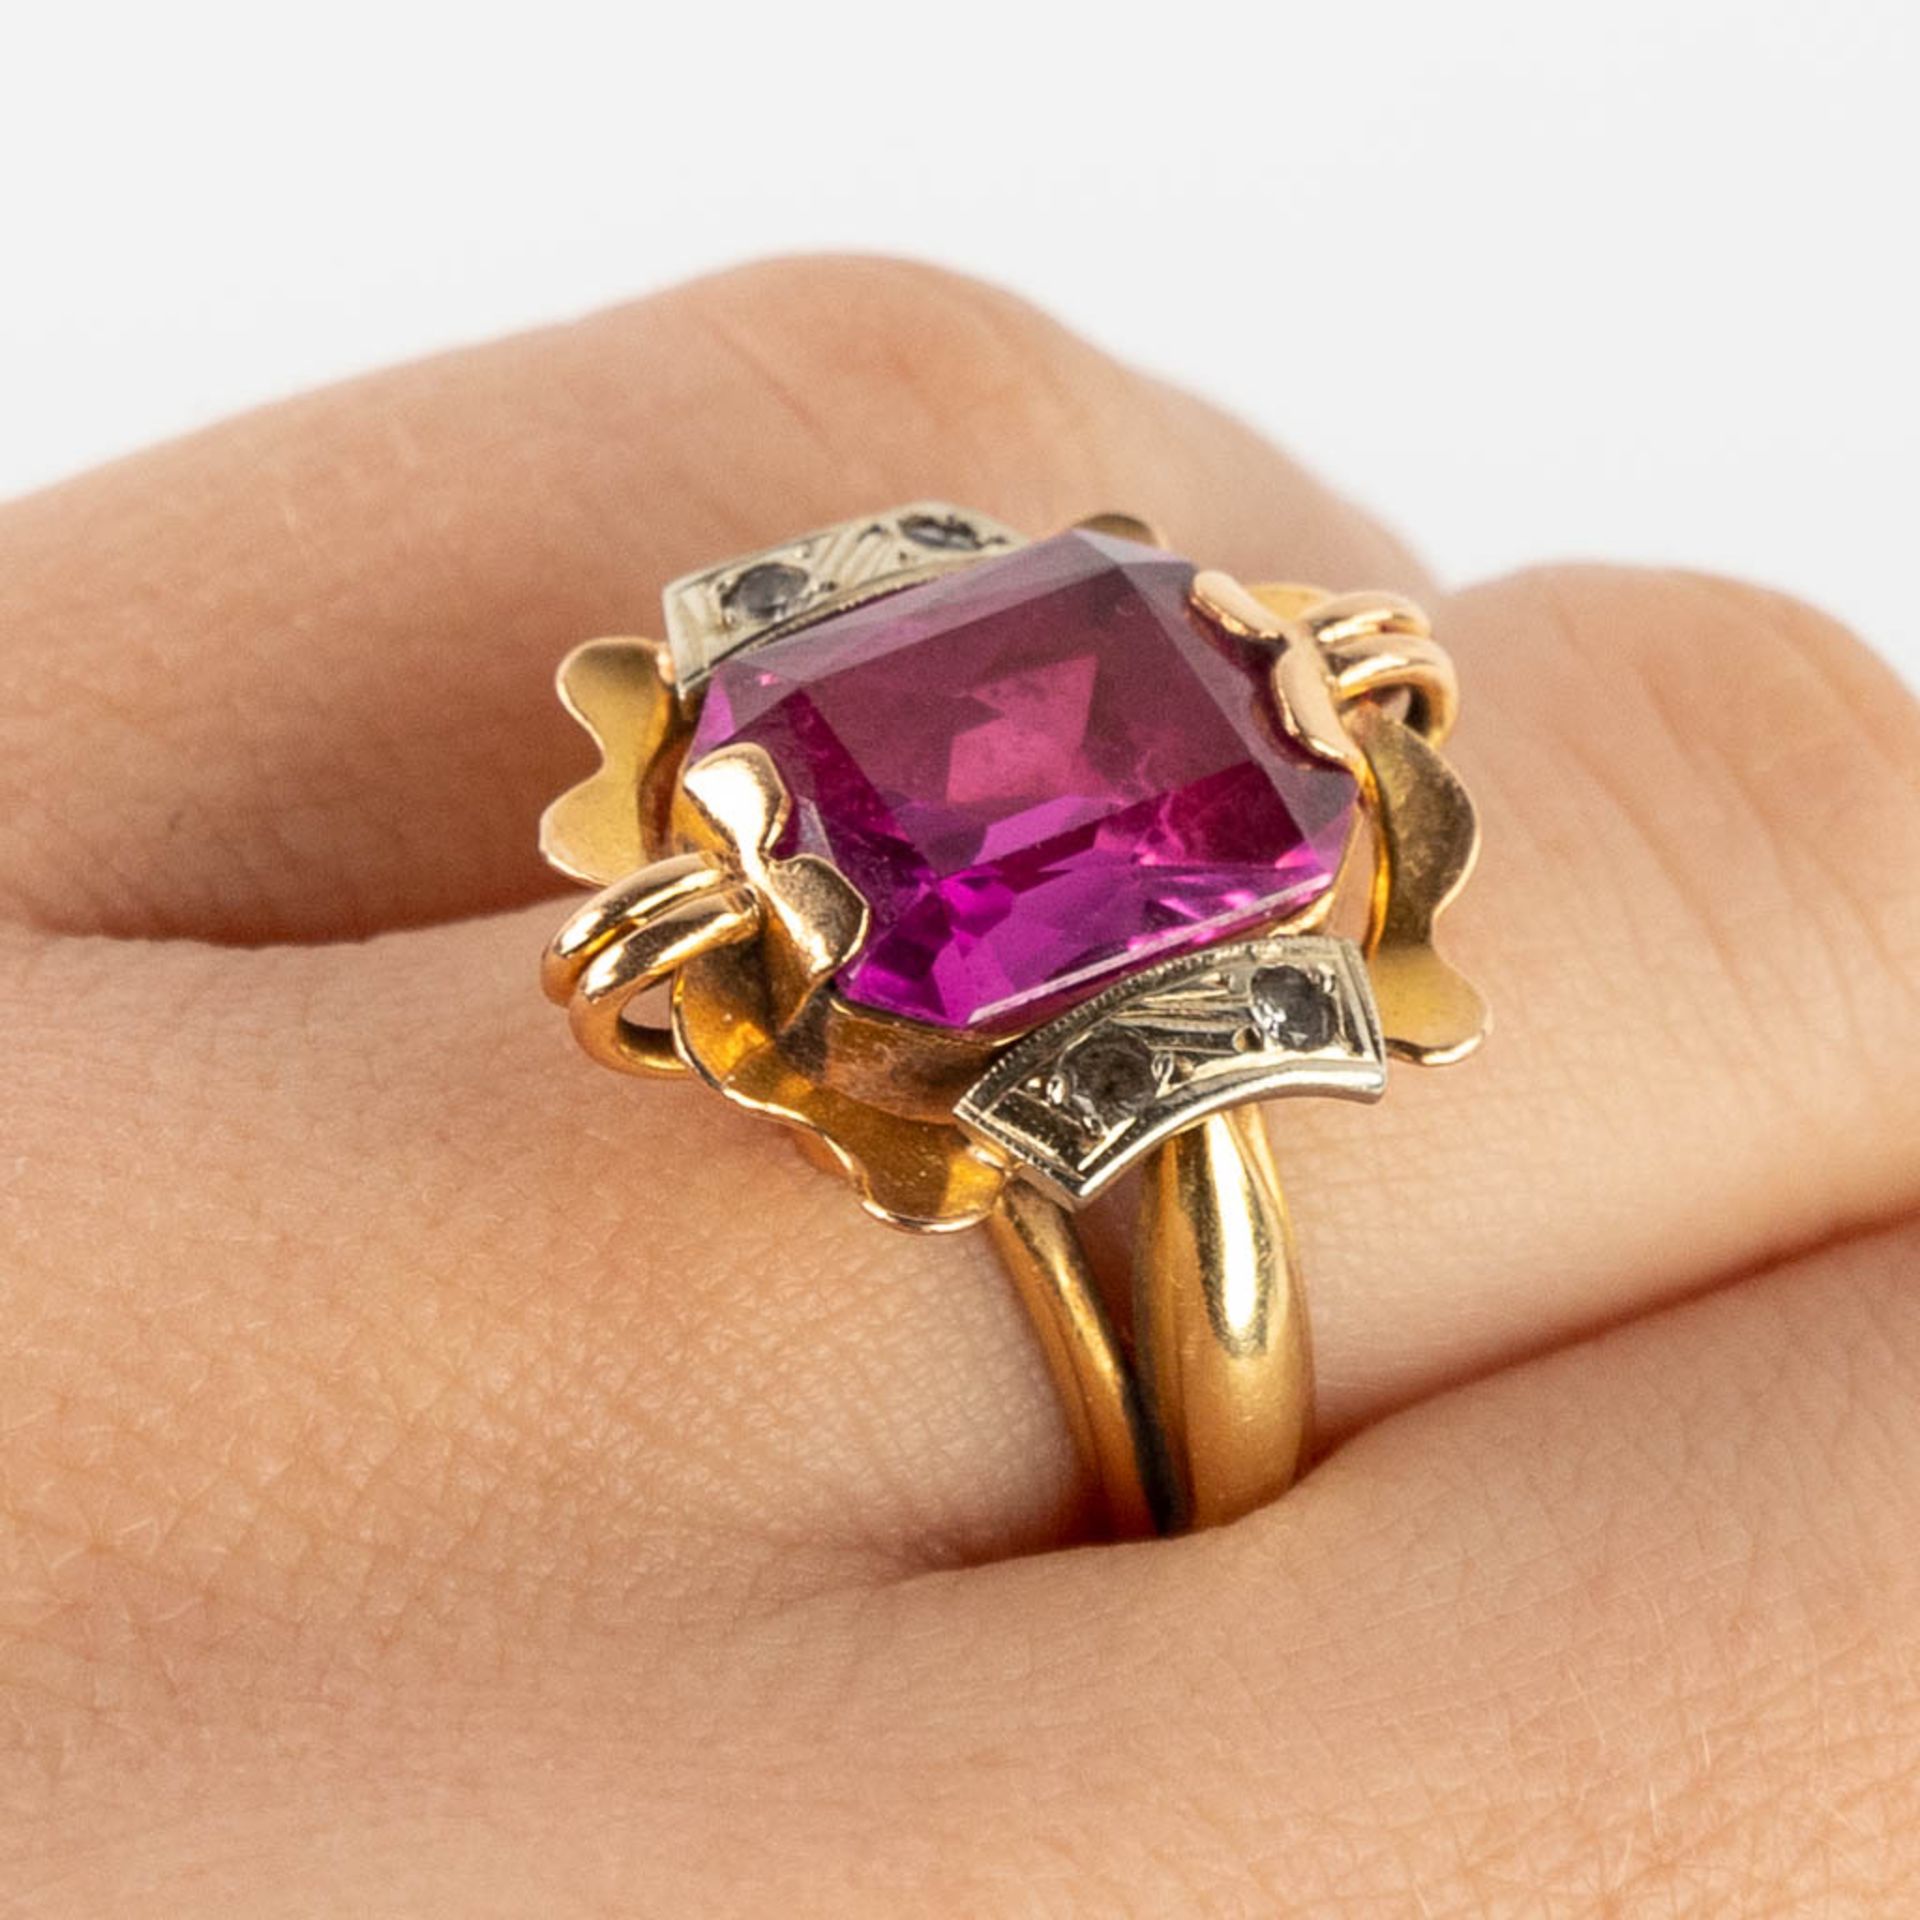 A yellow gold ring with a cut light purple stone/glass. 6,87g. Ring size: 52. - Image 8 of 9